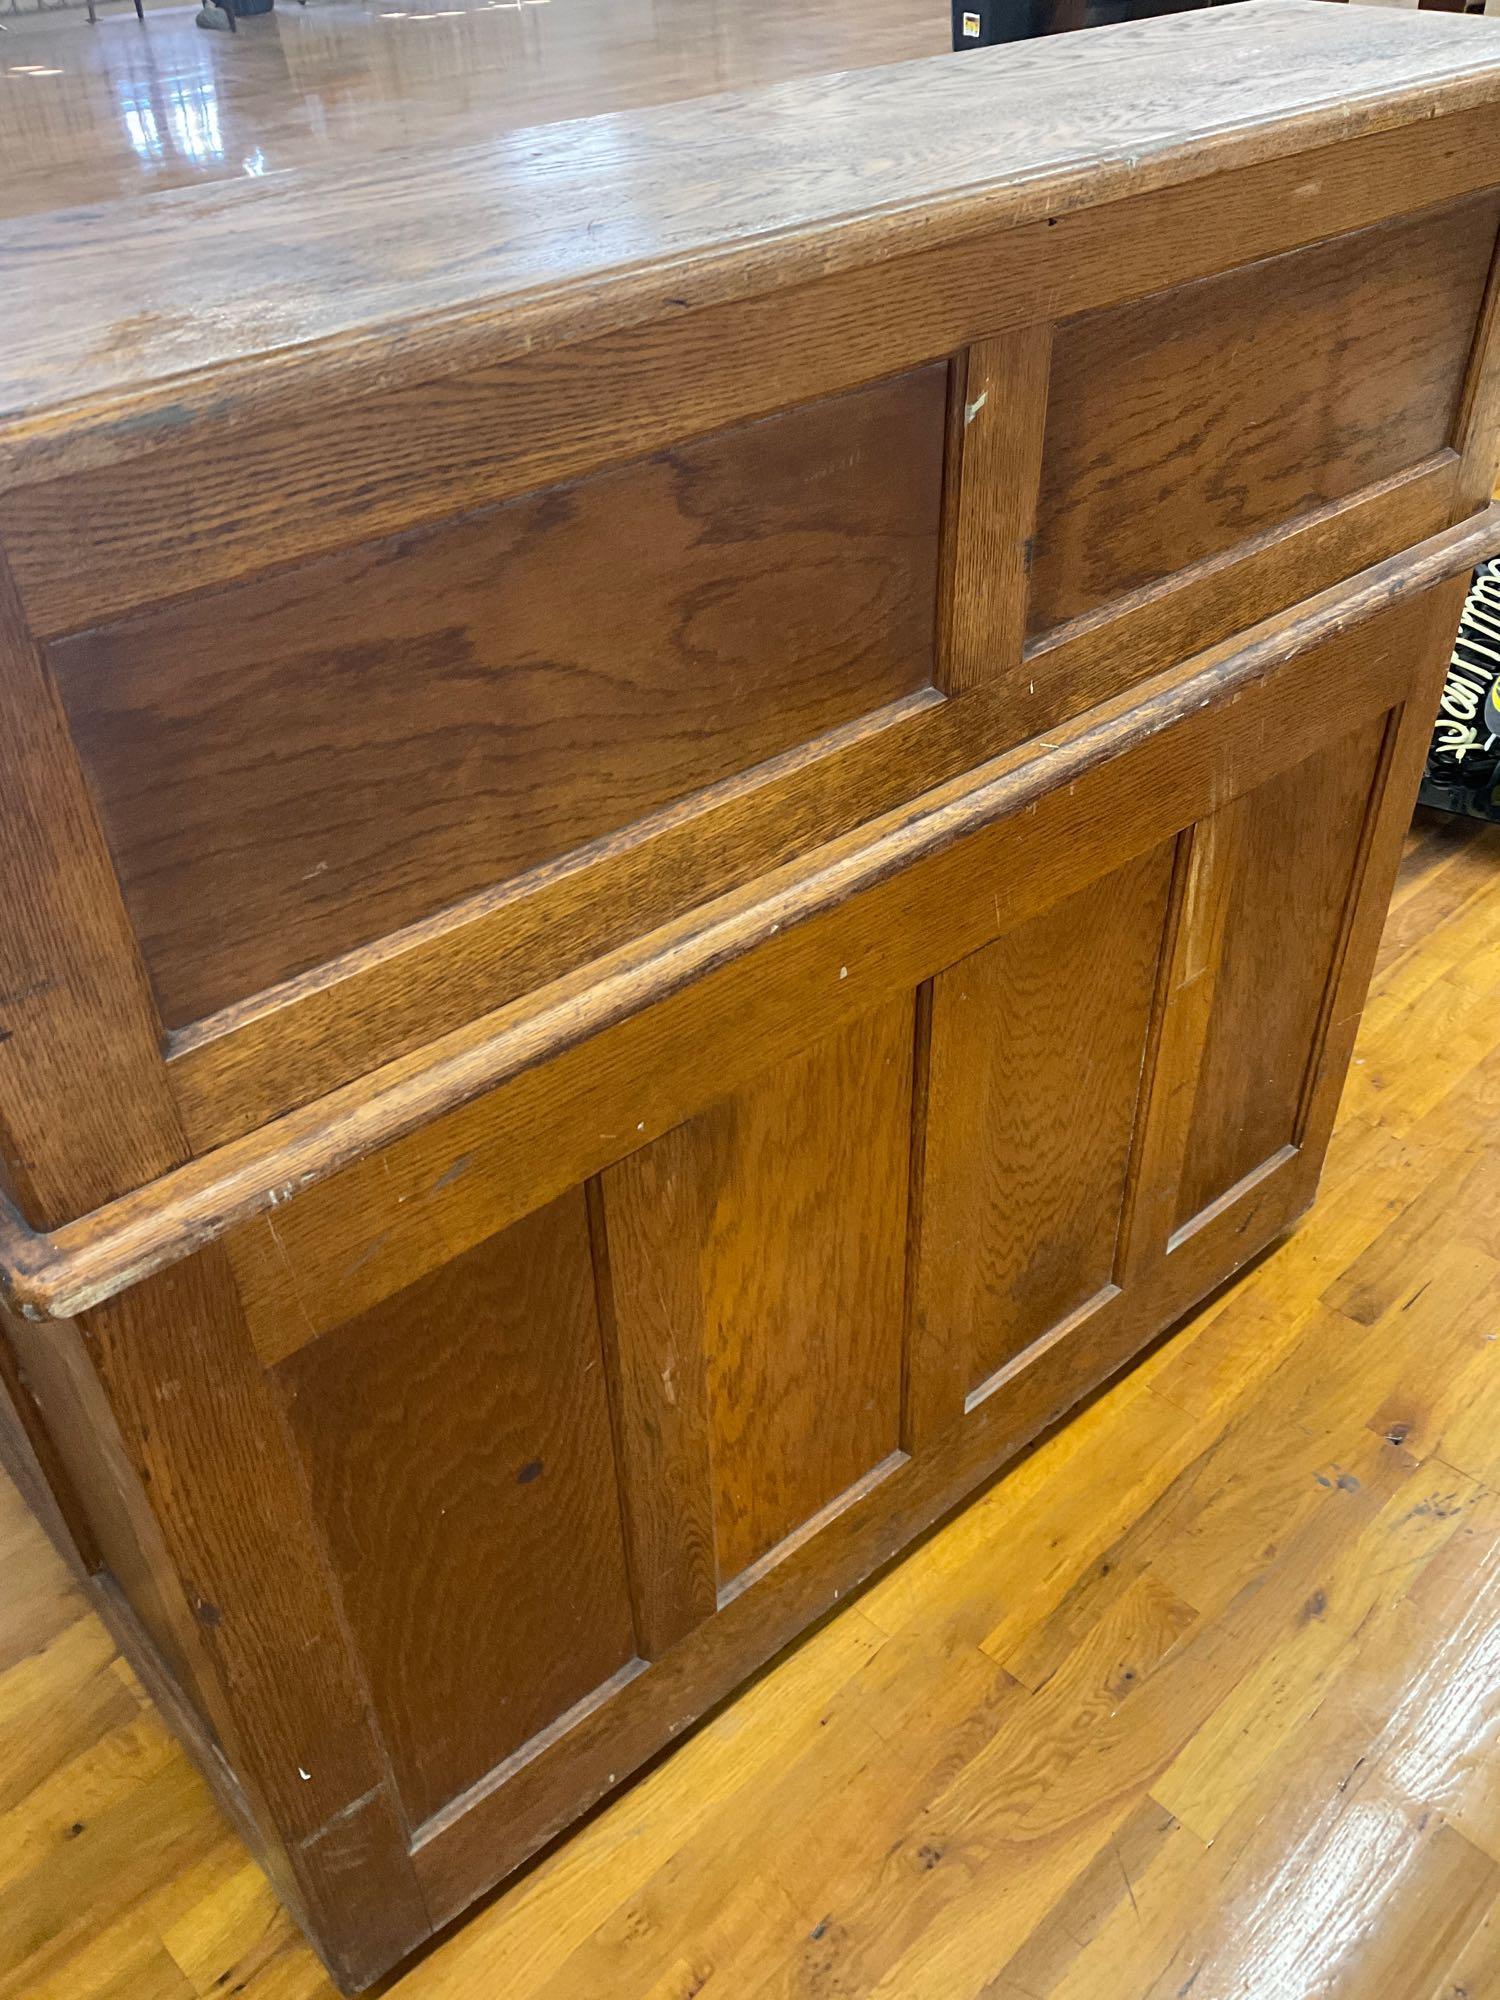 Antique roll top desk by Forest City Furniture Rockford Illinois. 44" x 48" x 34" on casters